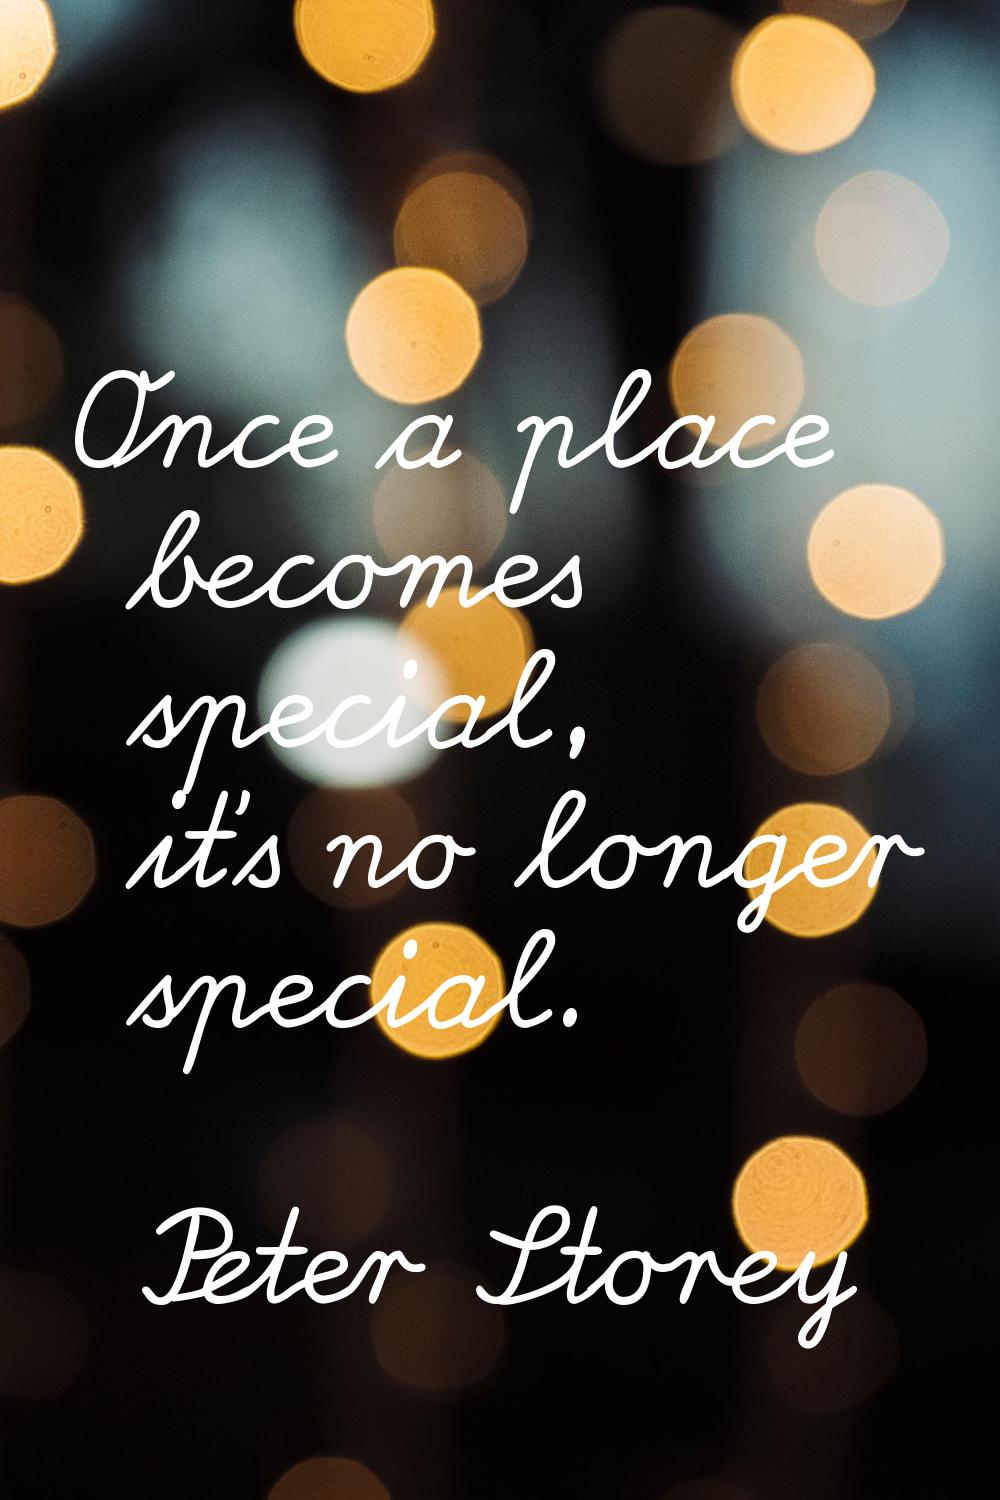 Once a place becomes special, it's no longer special.